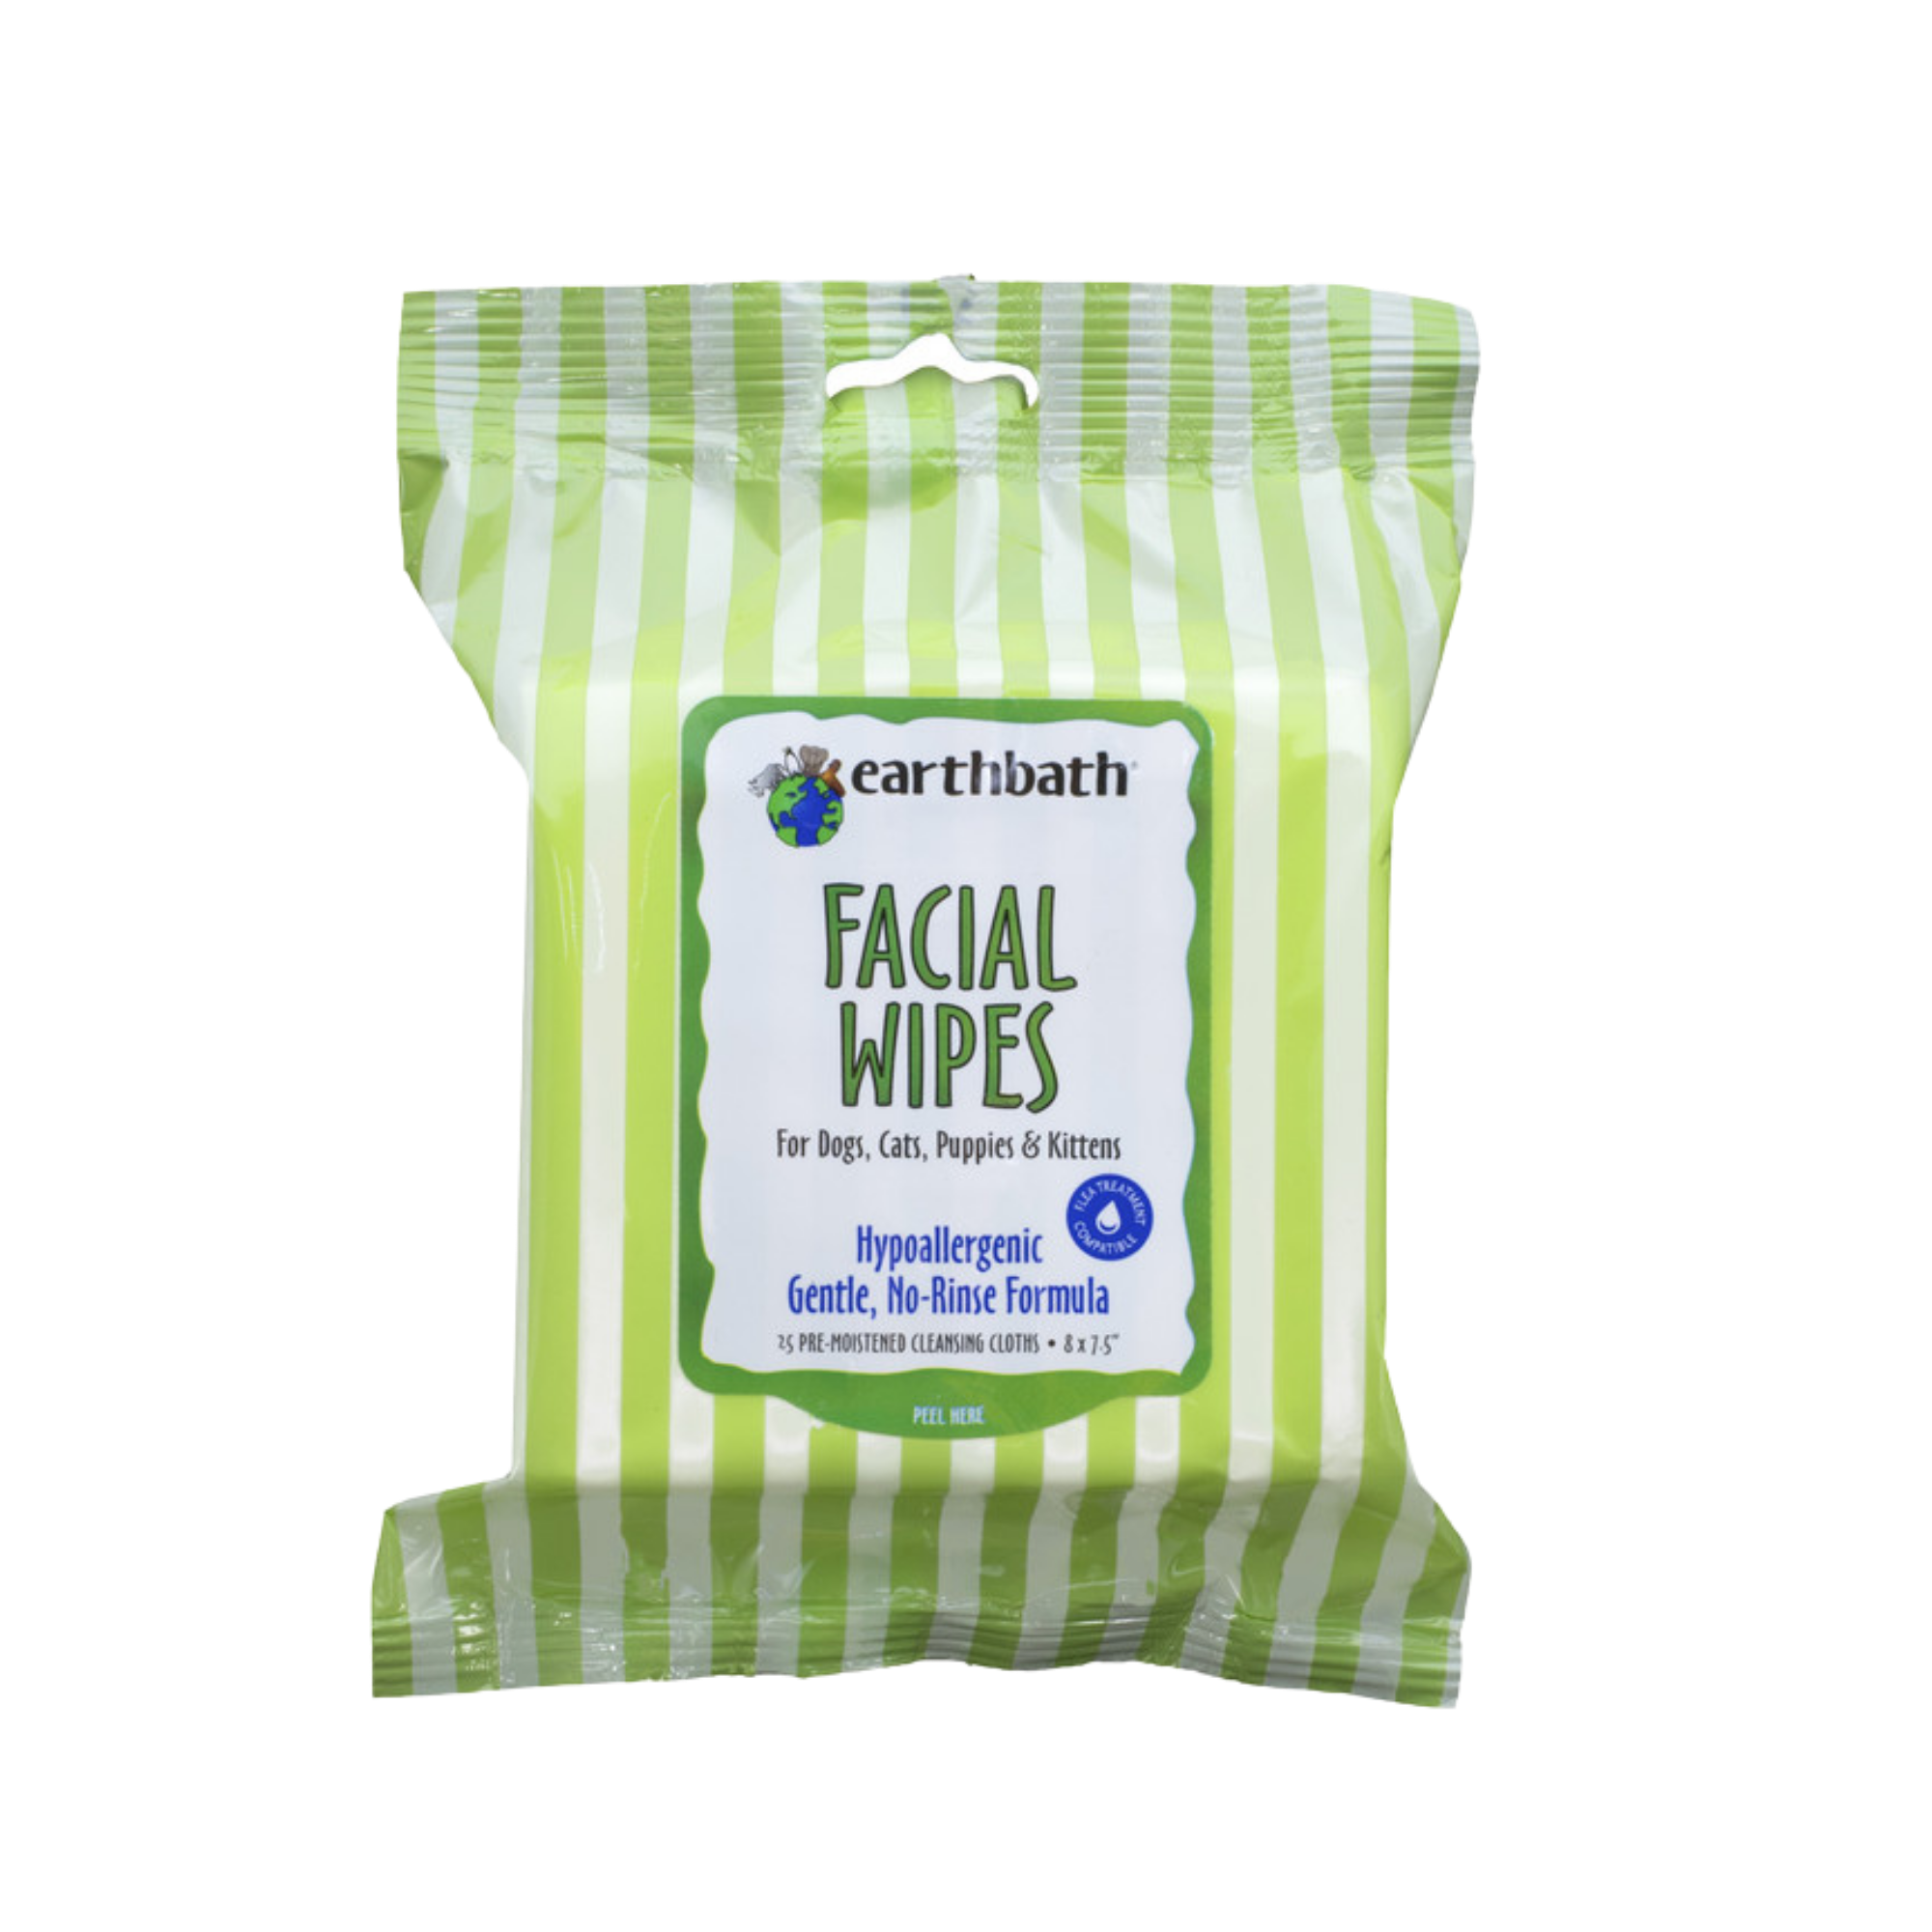 Earthbath Facial Wipes Hypo-Allergenic Cucumber Melon 25ct - Mutts & Co.